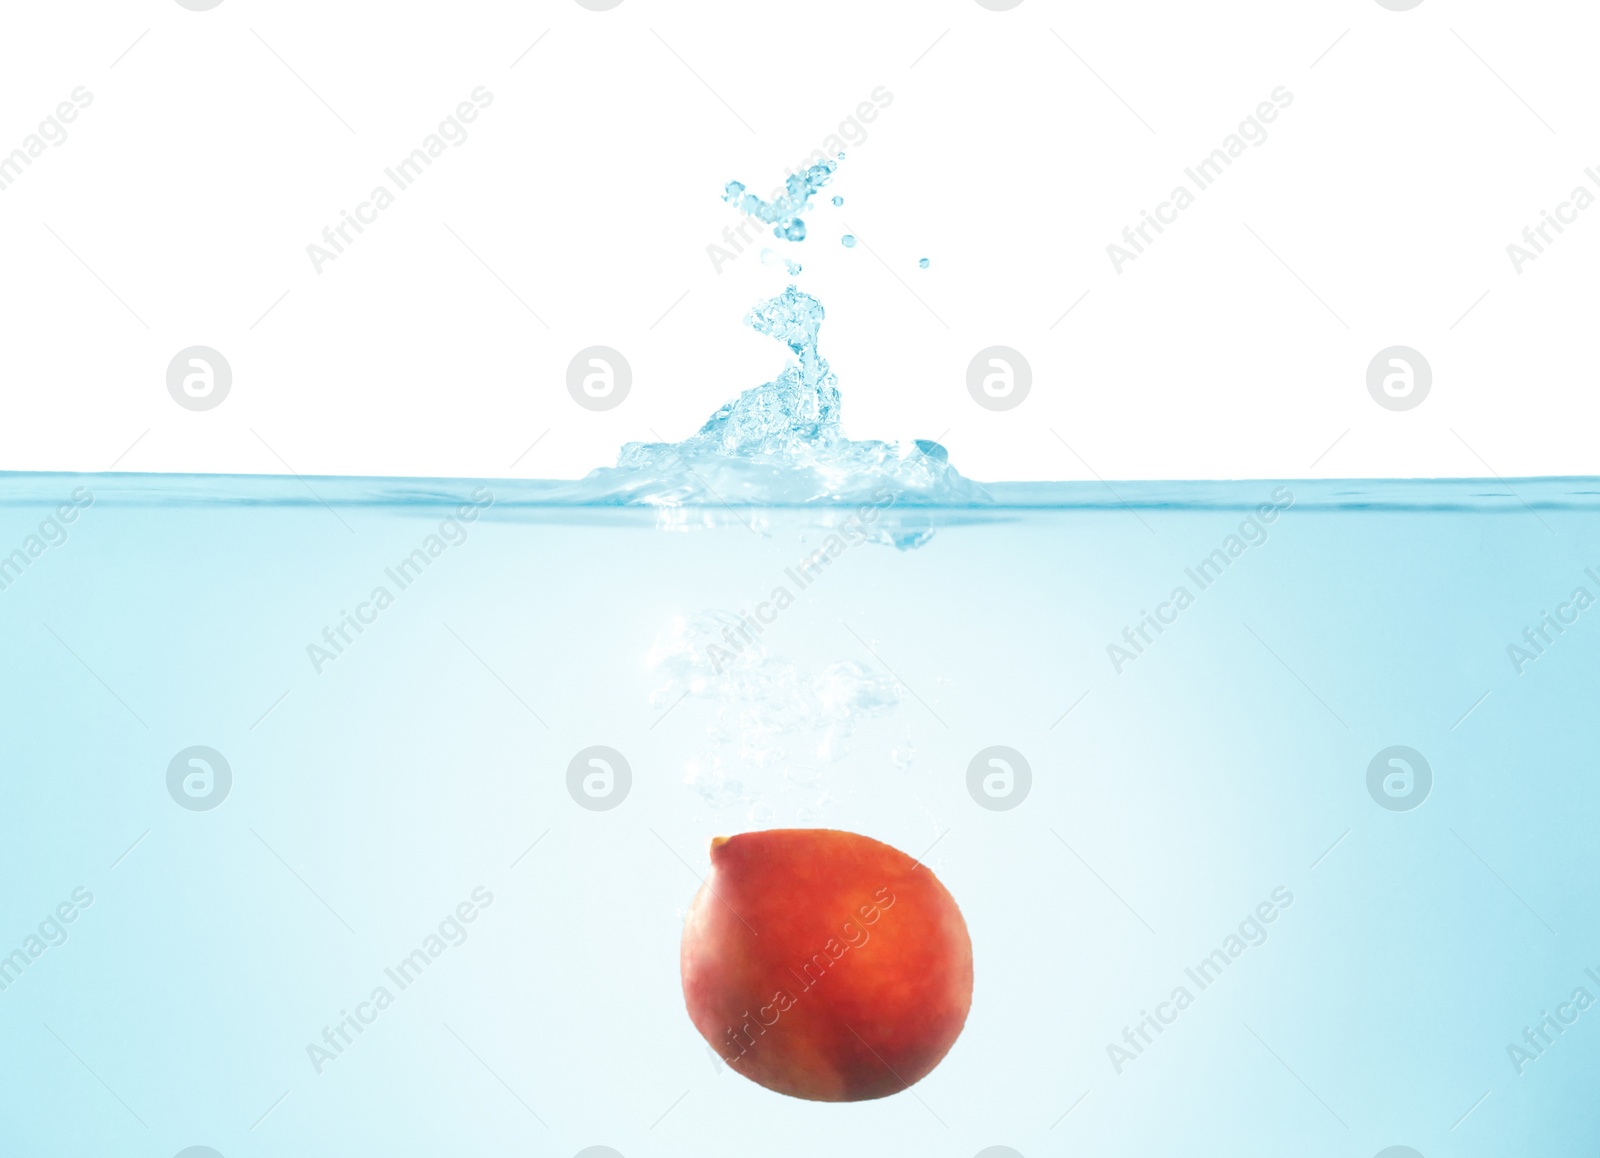 Photo of Peach falling down into clear water against white background